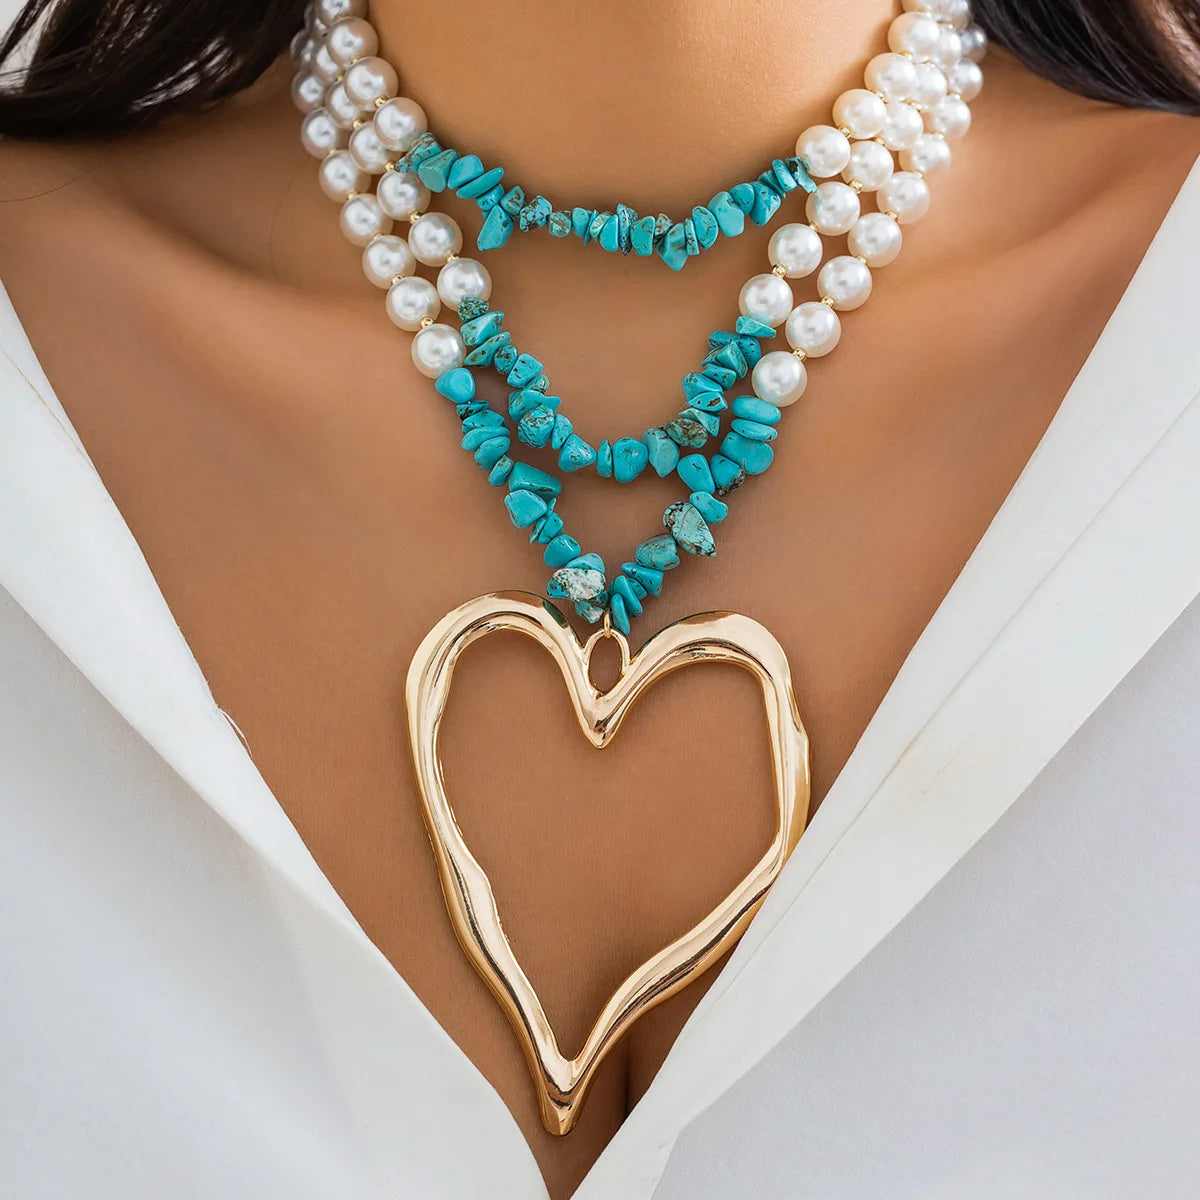 Pearl Bead Chain Necklace for Women with Hollow Heart Pendant